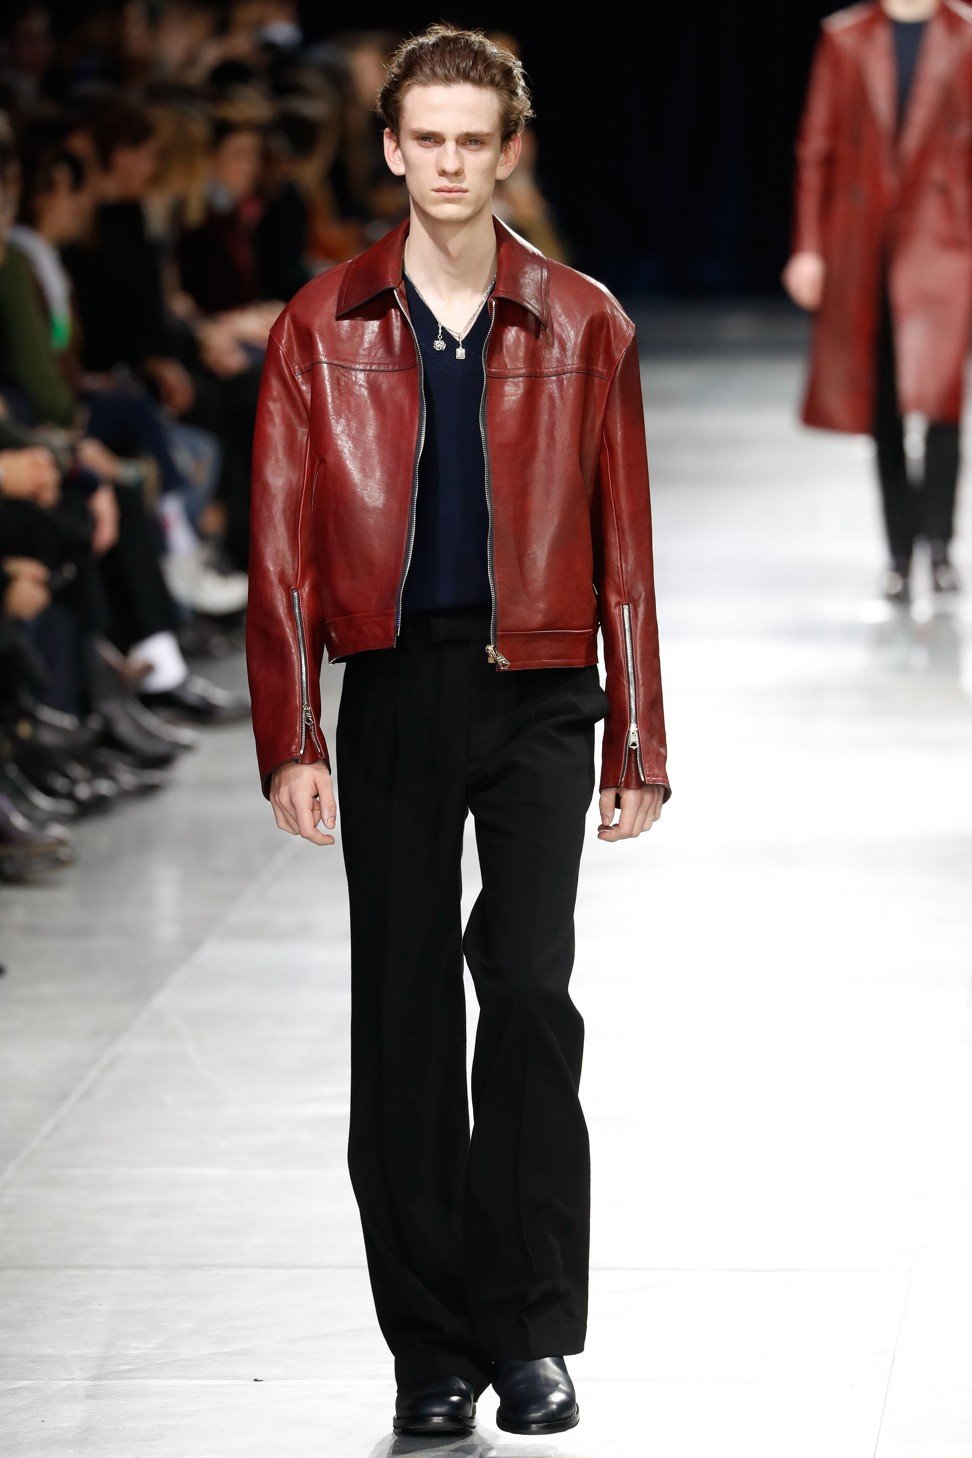 A chic look in Paul Smith’s collection. Photo: AFP